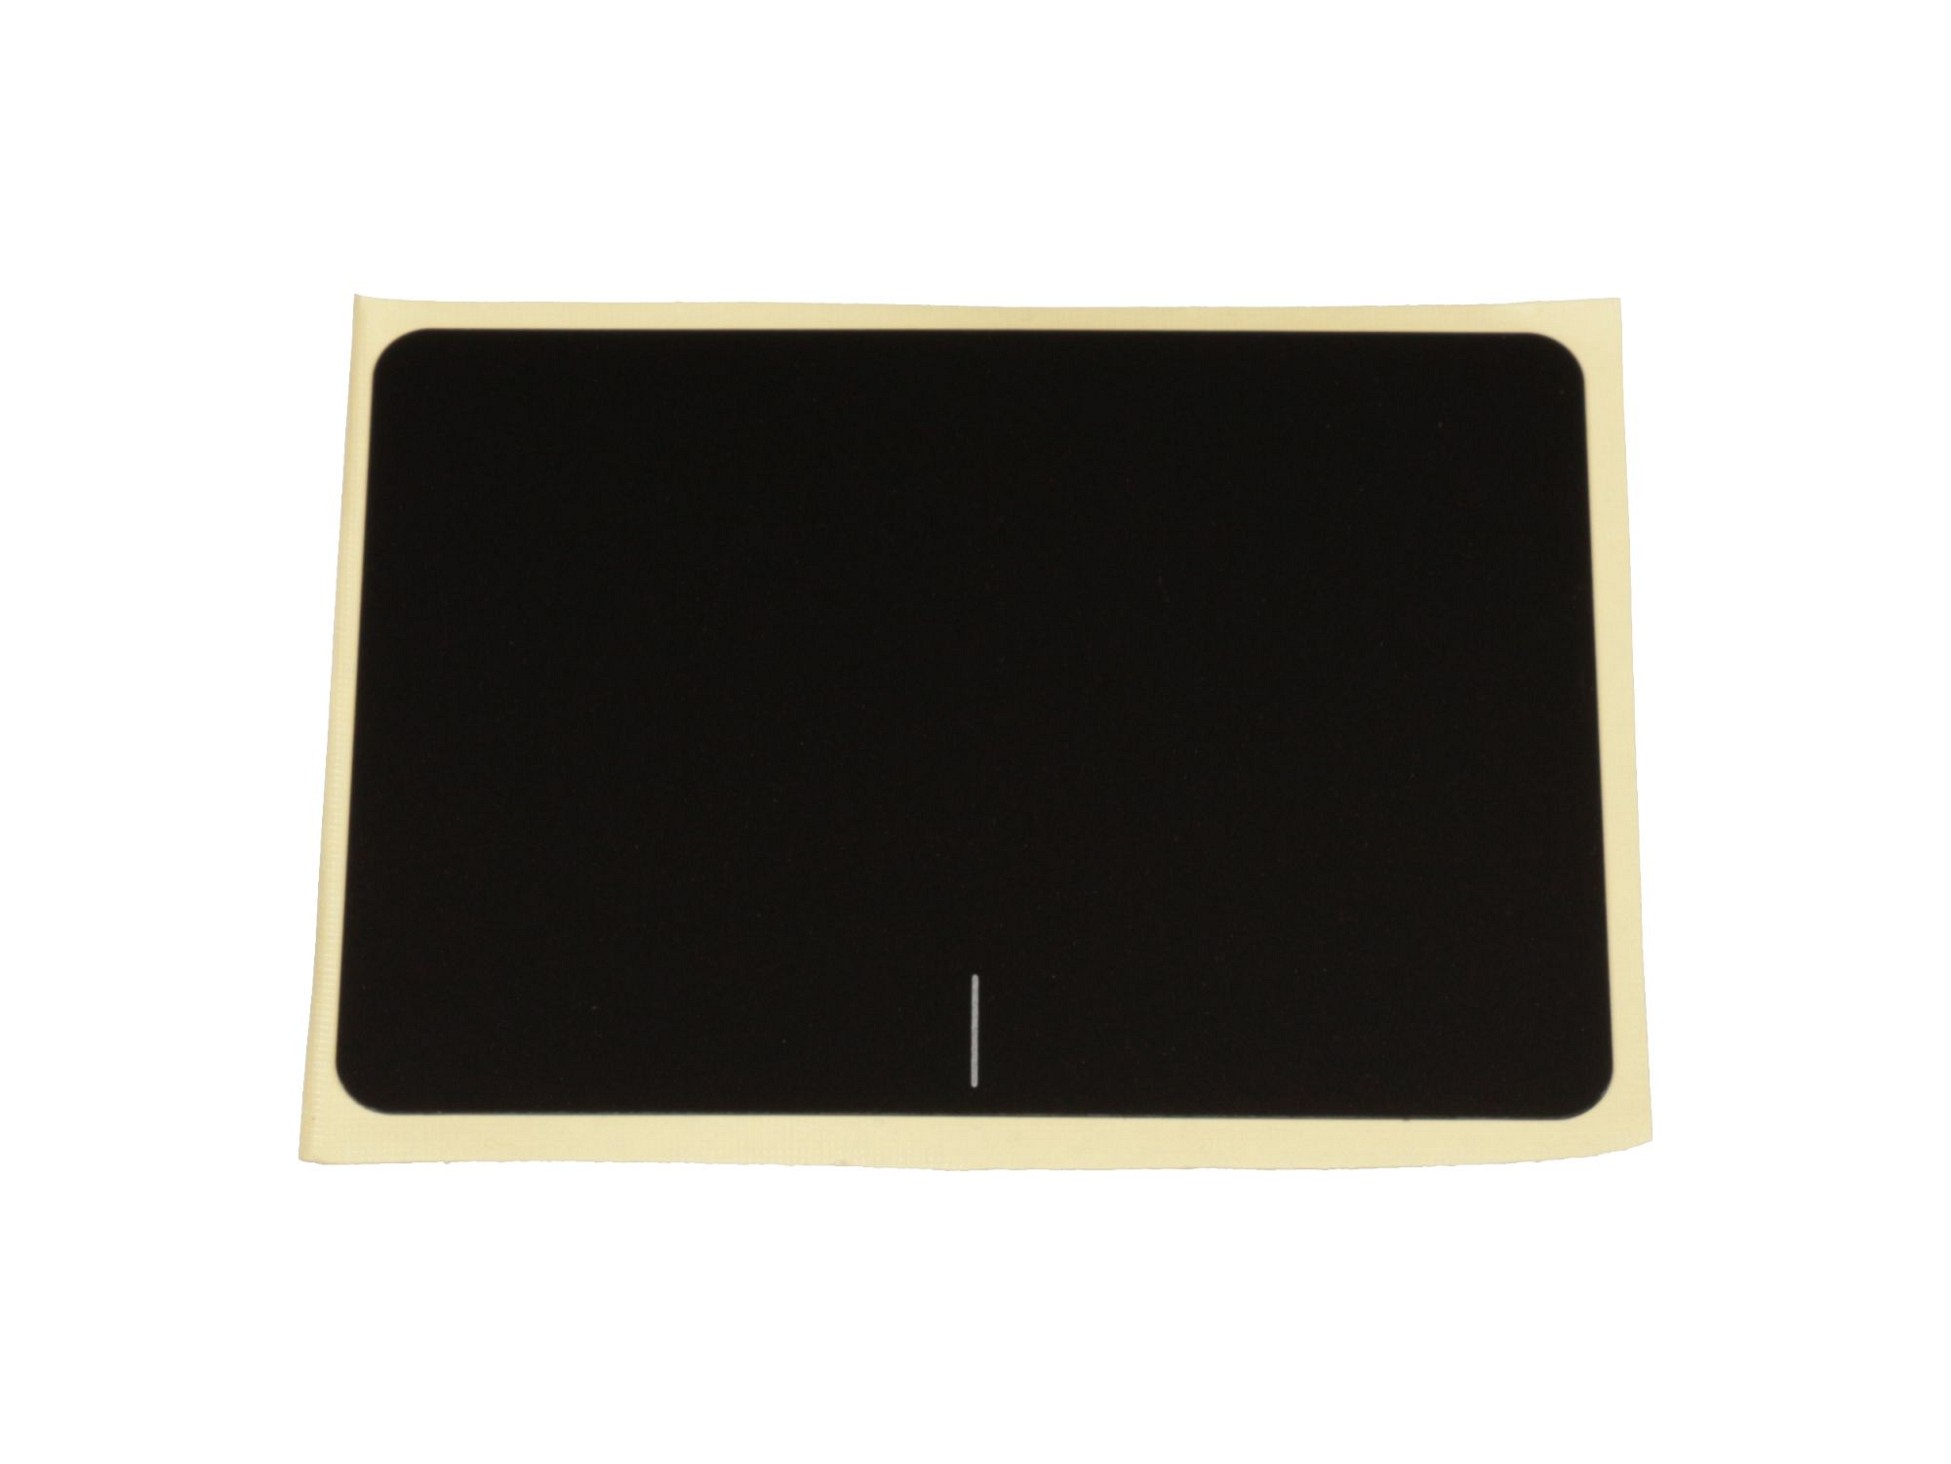 Touchpad-Cover für Asus X756UX